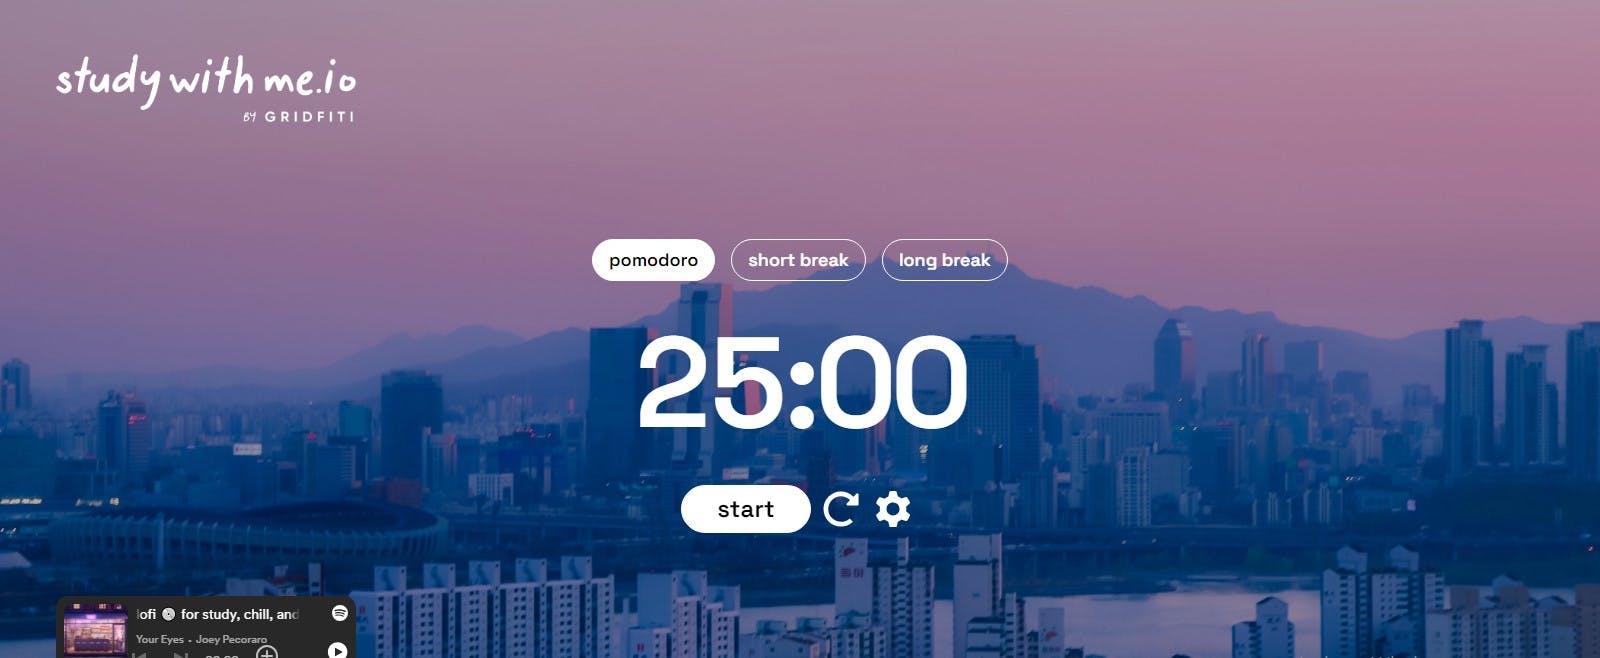 Website offering aesthetic Pomodoro timers with some including LoFi music and a chat feature for virtual study sessions.